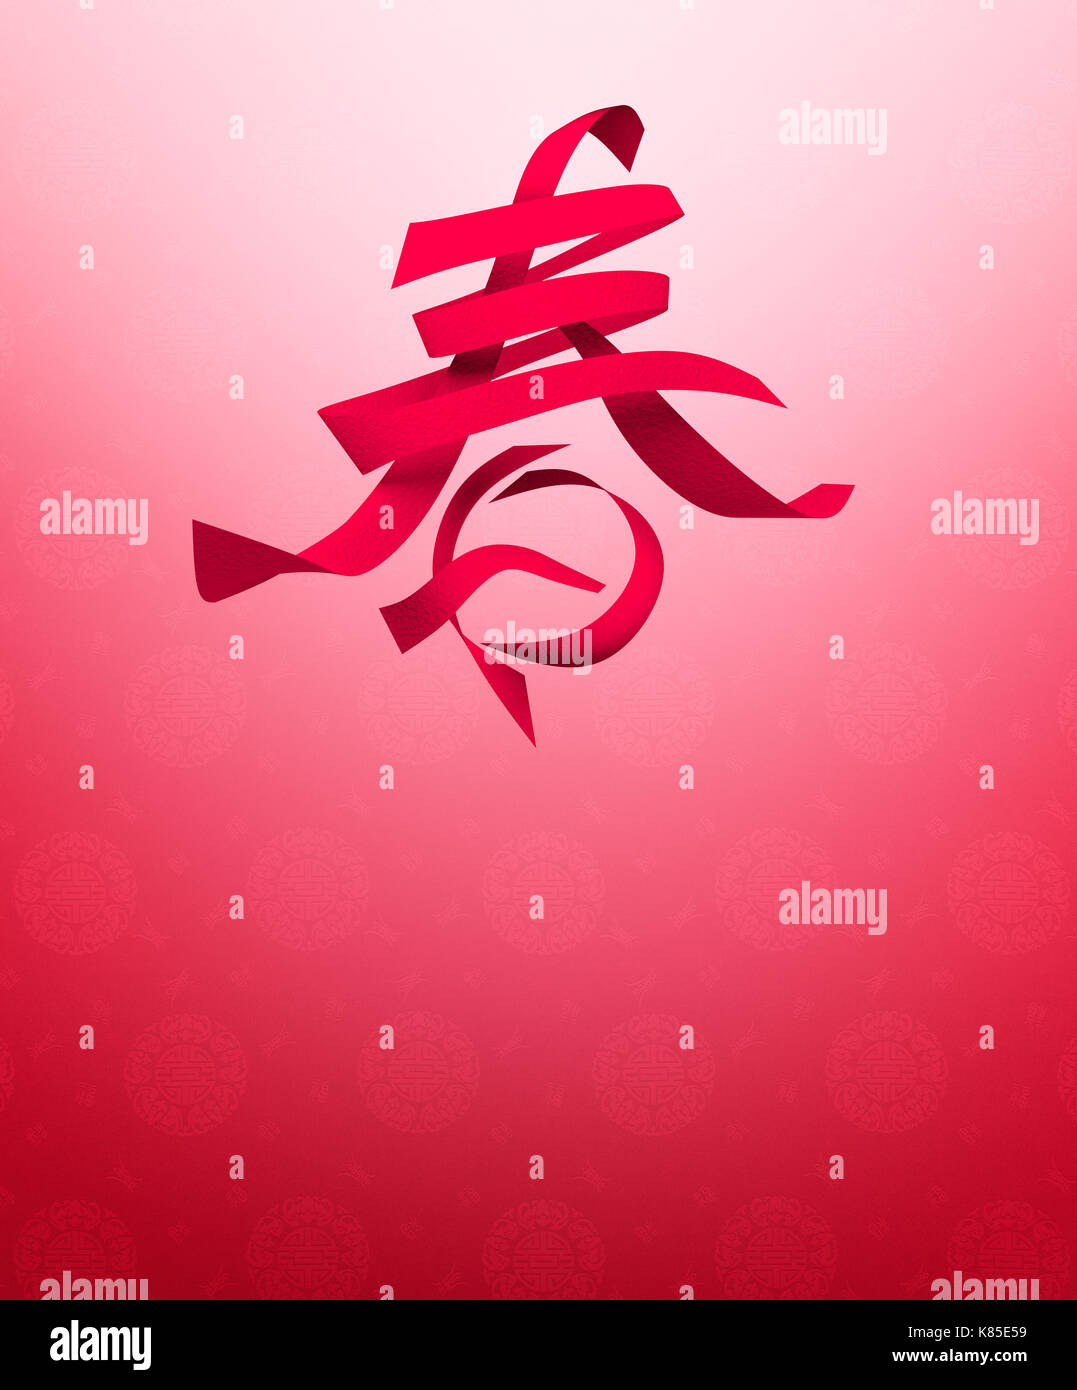 Chinese calligraphy 'chun' (Foreign text means spring) Stock Photo